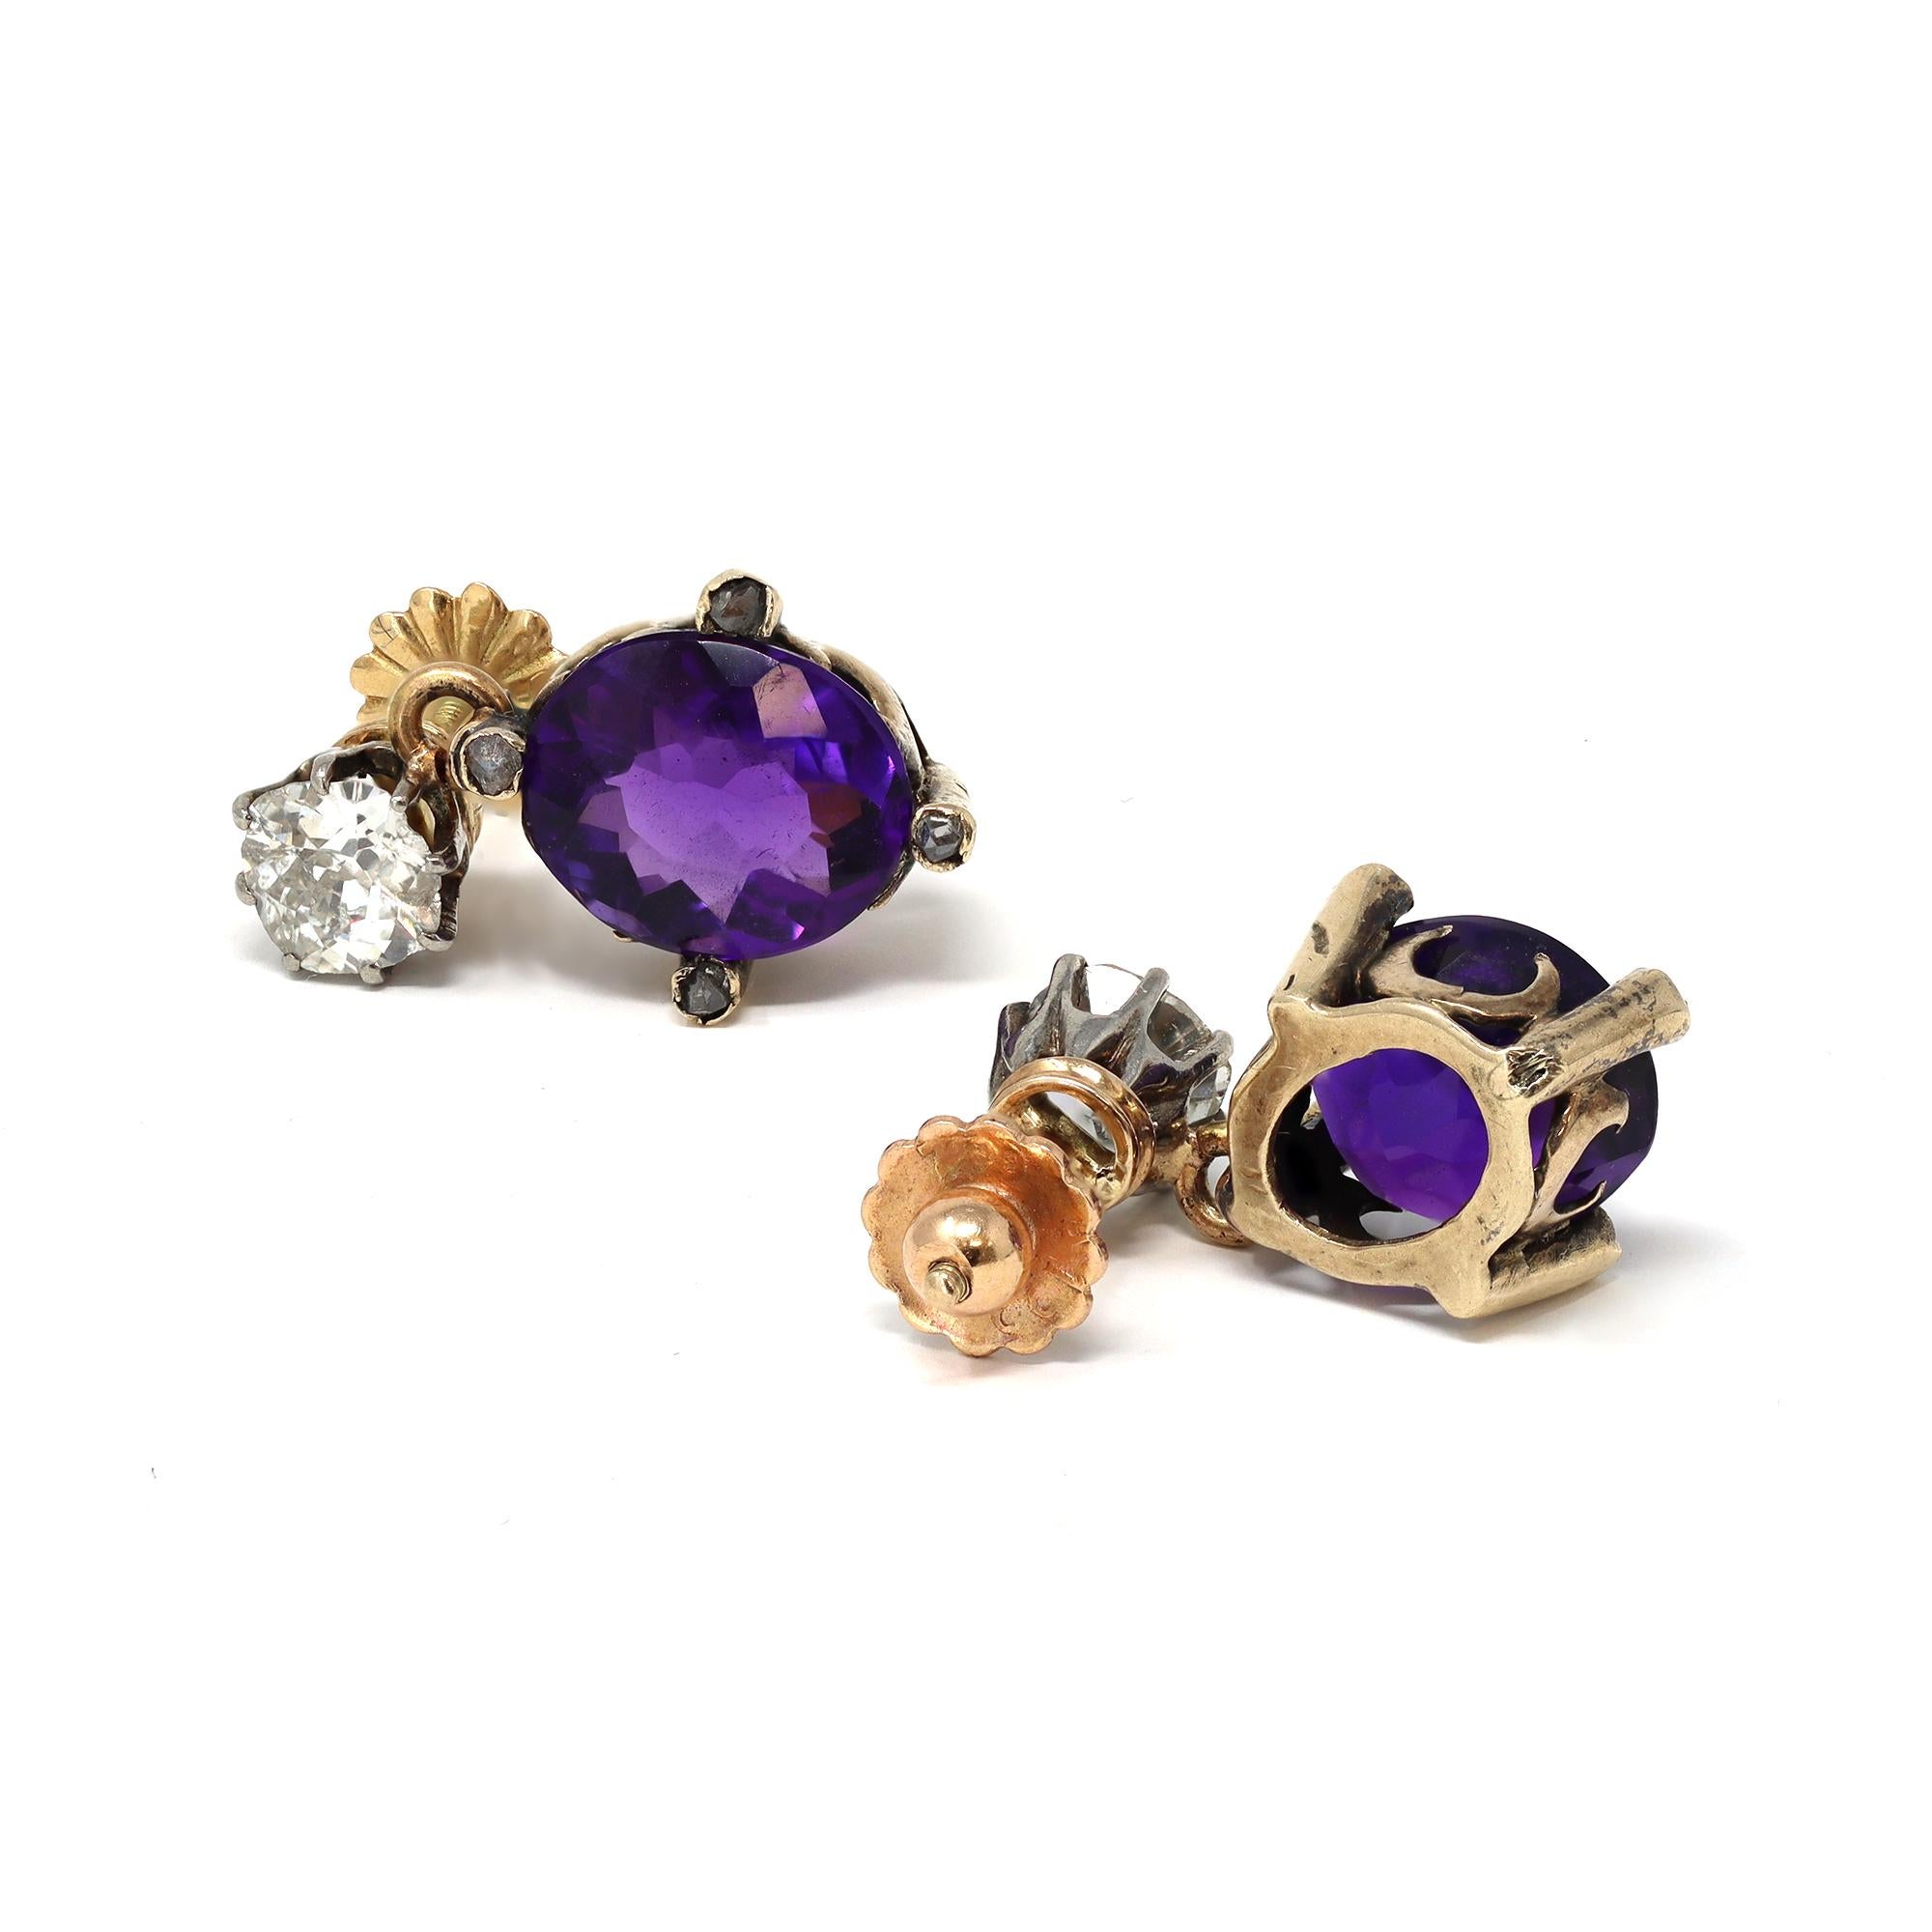 An original pair of Victorian earrings circa 1890 featuring diamond studs and vibrant purple oval amethysts dangle. The diamonds are old mine cut and have an estimated weight of one carat, HI color SI clarity. The amethysts are oval shape and